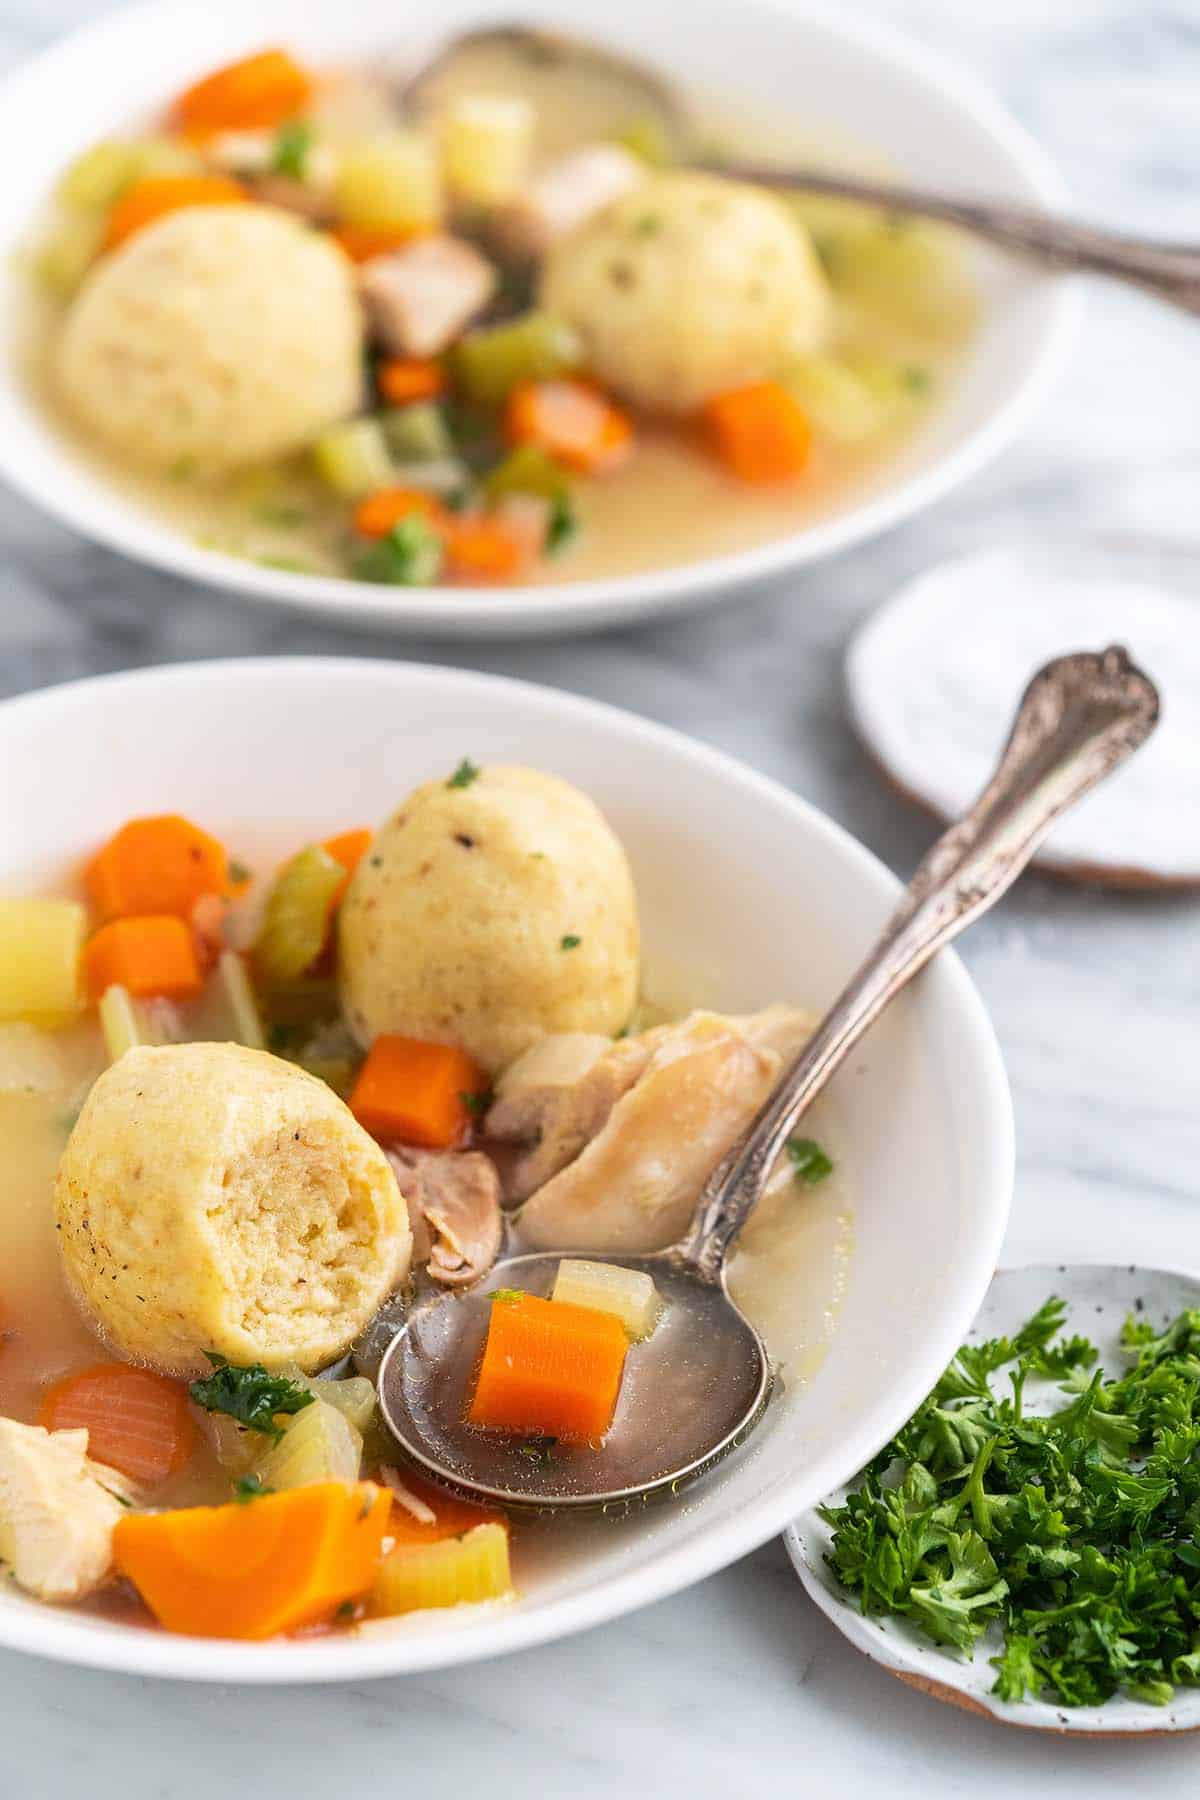 front view of bowls of chicken matzo balls soup with bite taken out of one ball to show fluffy texture